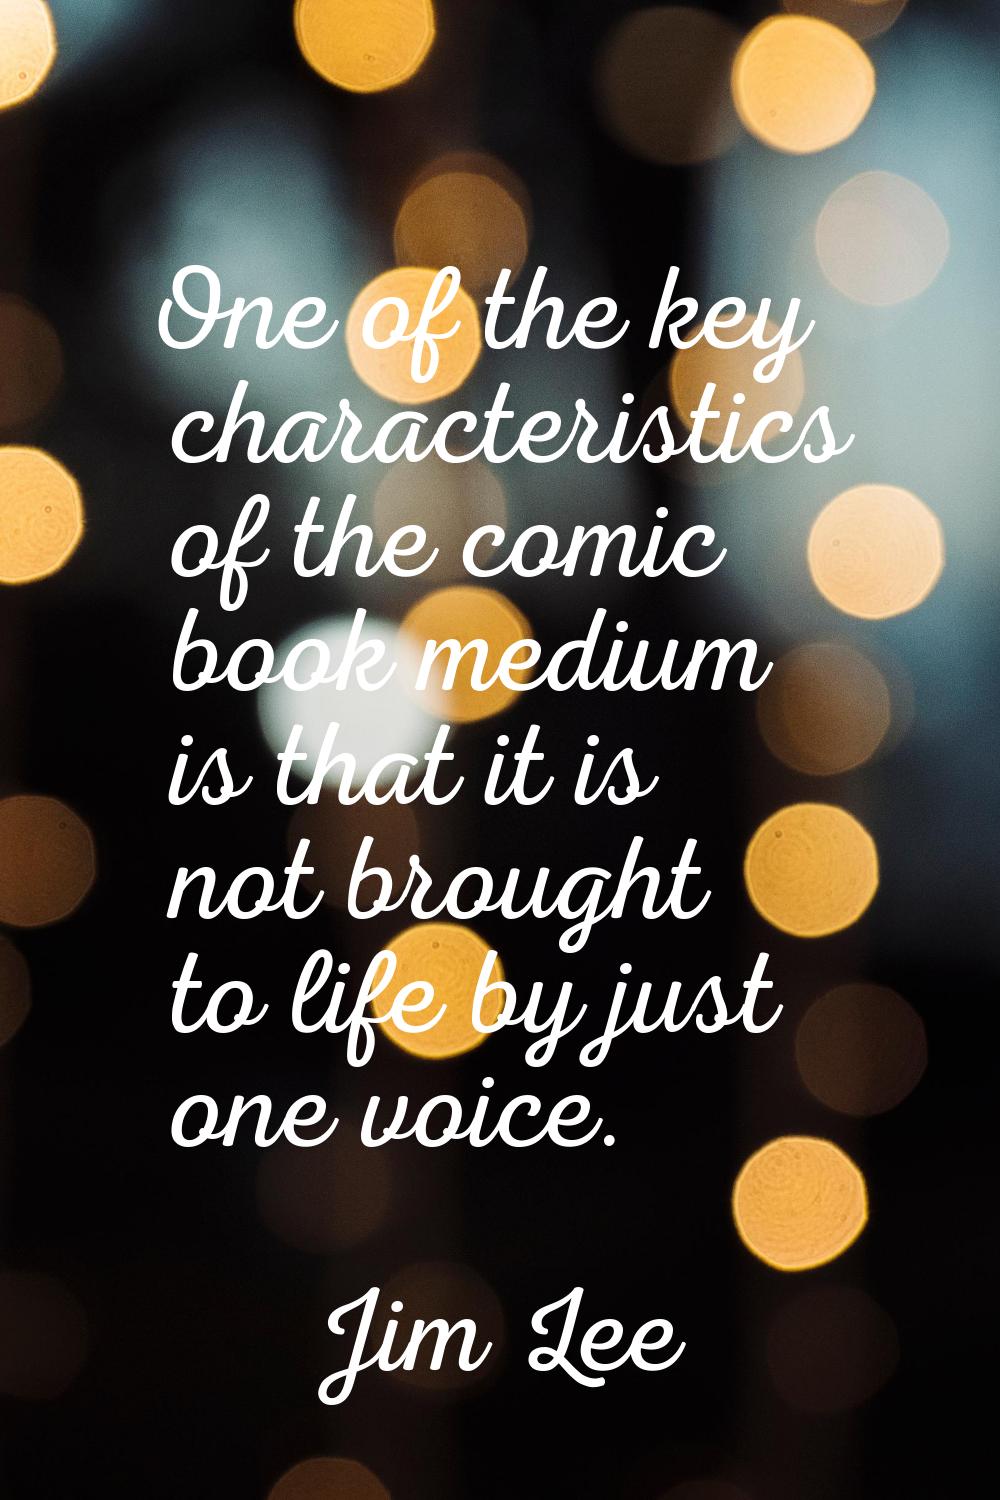 One of the key characteristics of the comic book medium is that it is not brought to life by just o